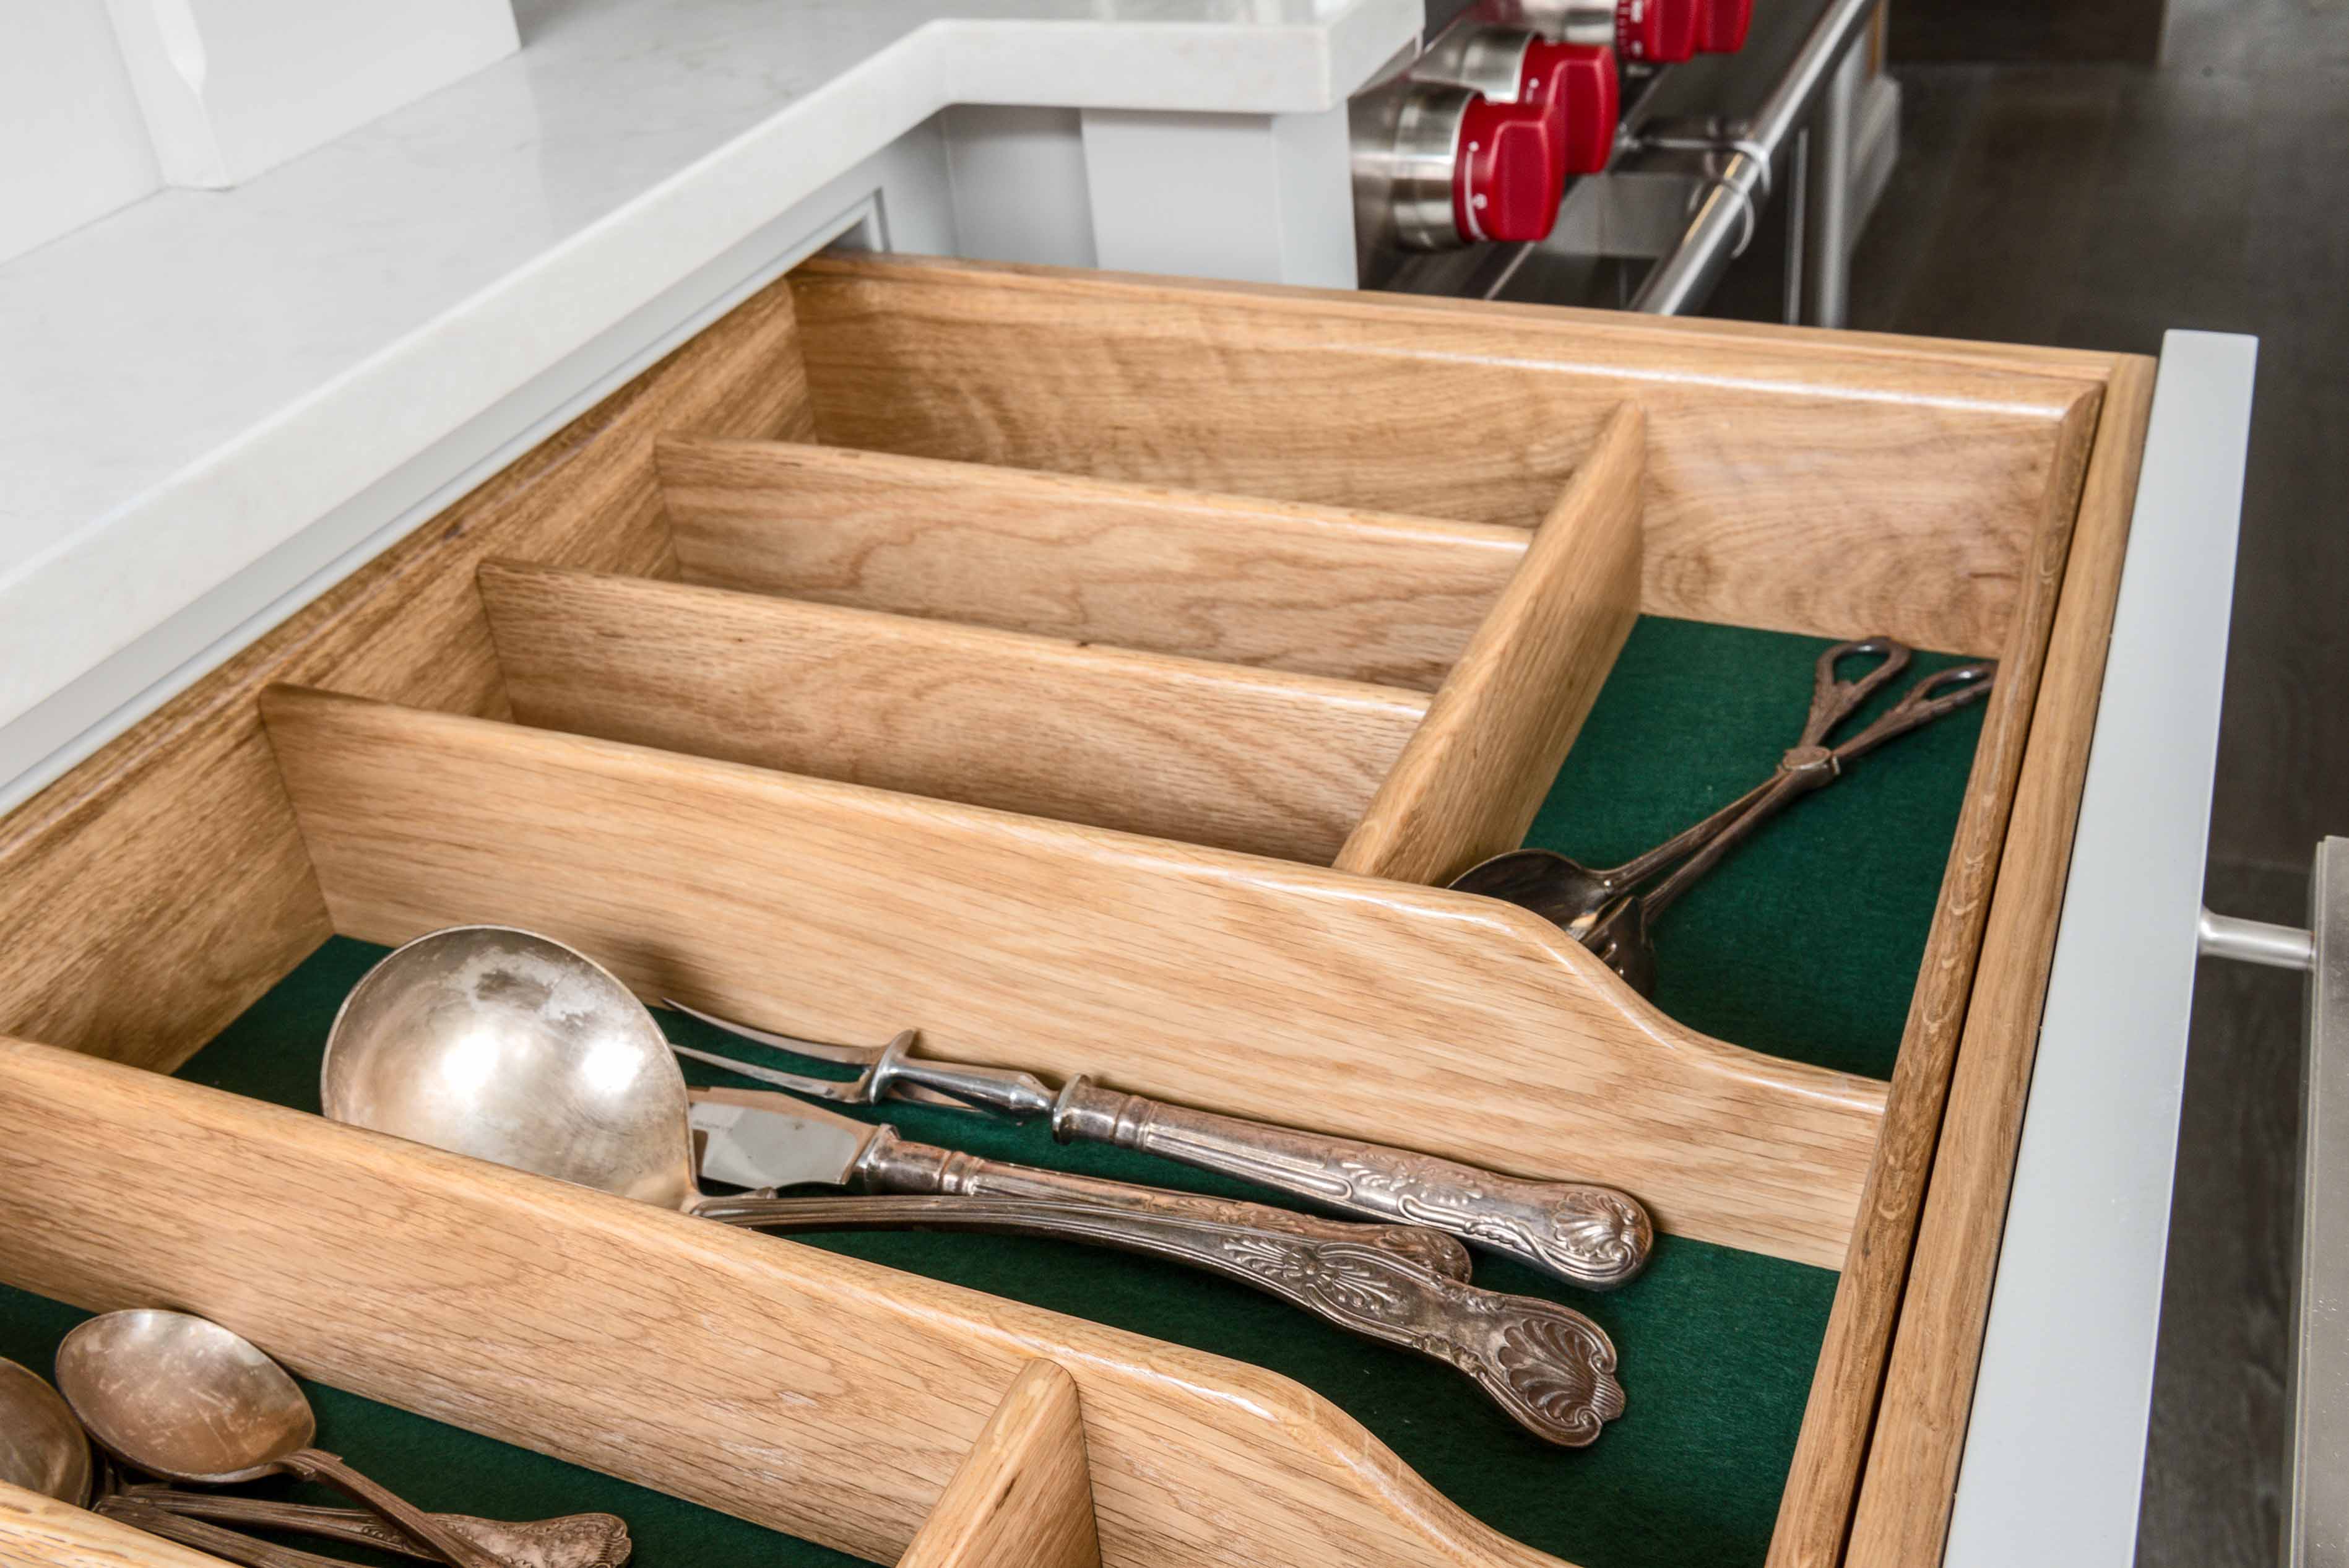 003. Bespoke kitchen shaker style oak cutlery utensil partitioned divider tray Armac Martin Farrow and Ball near Guildford, Surrey